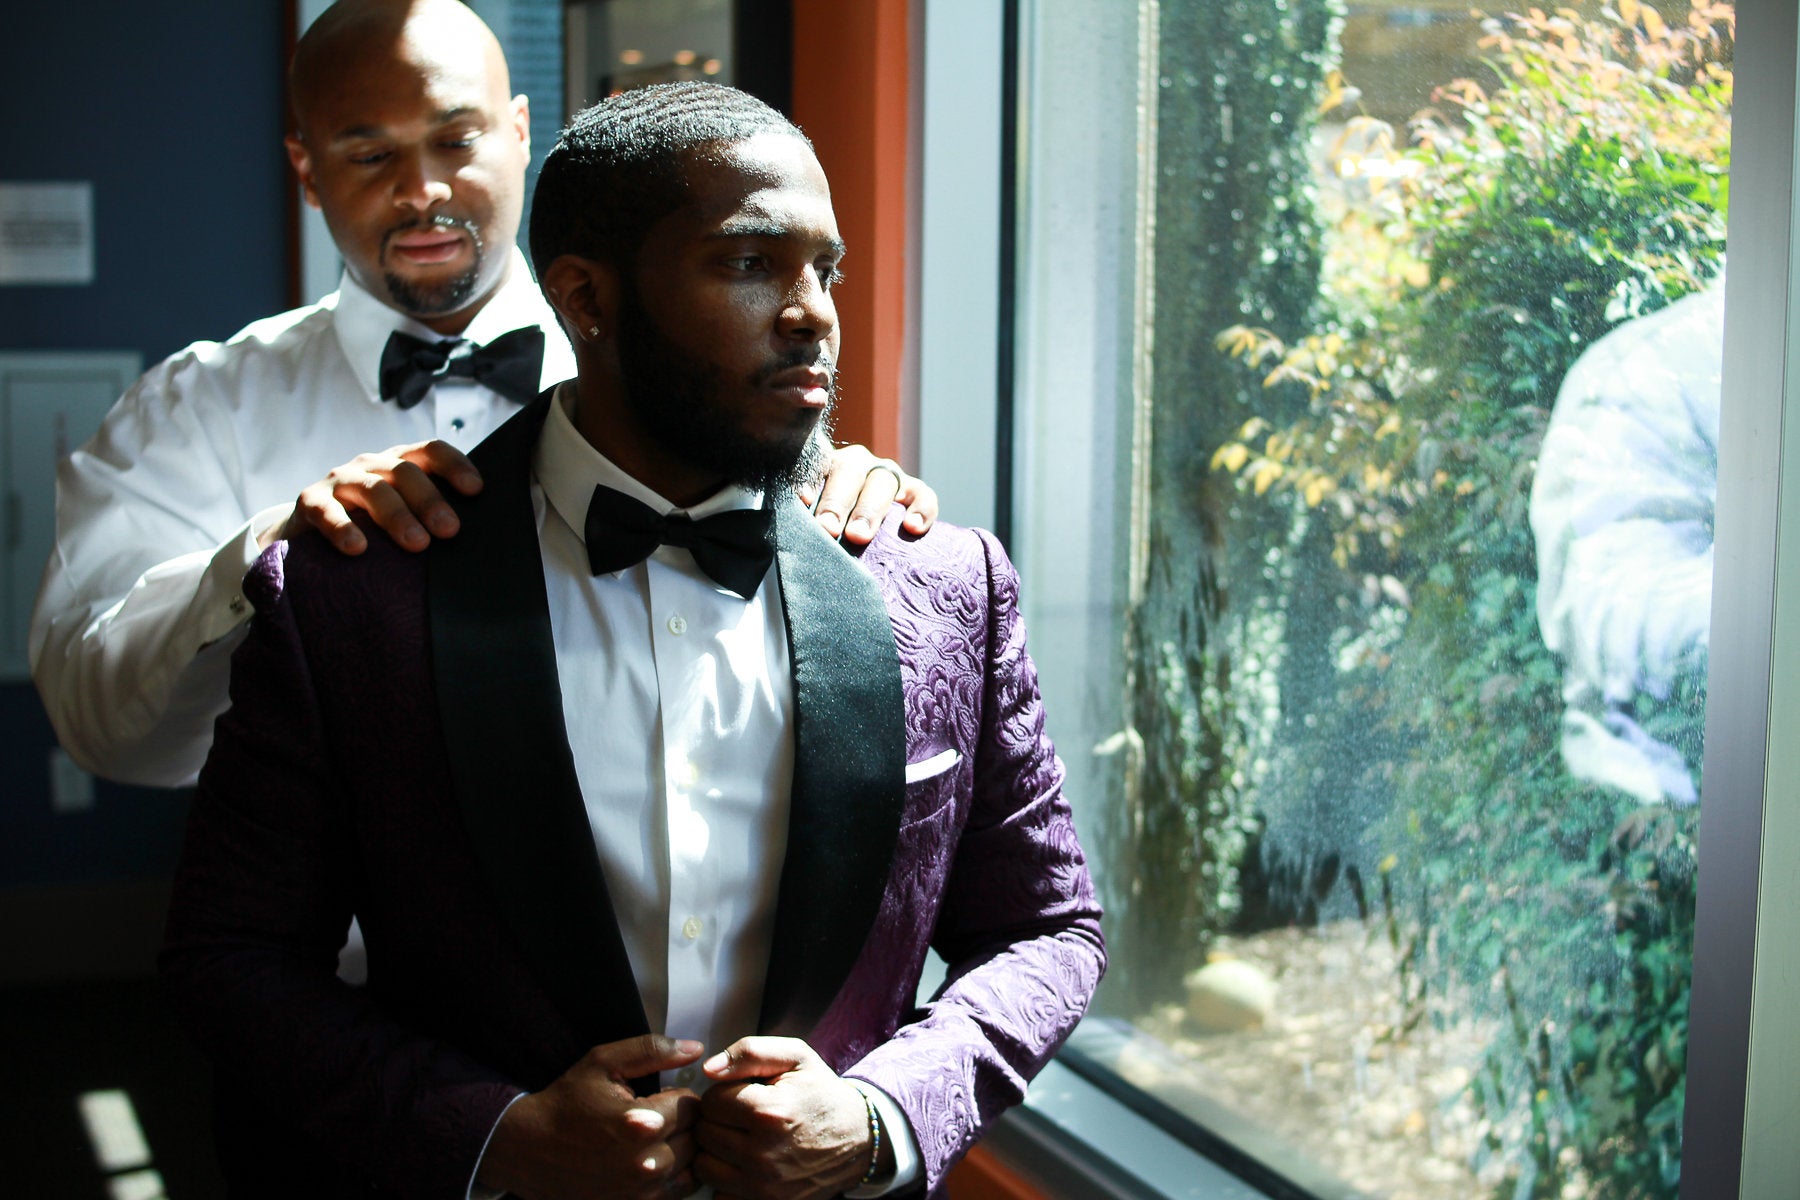 Bridal Bliss: Kwame and Michele’s Sweet Charlotte Wedding Photos Are Full Of Love